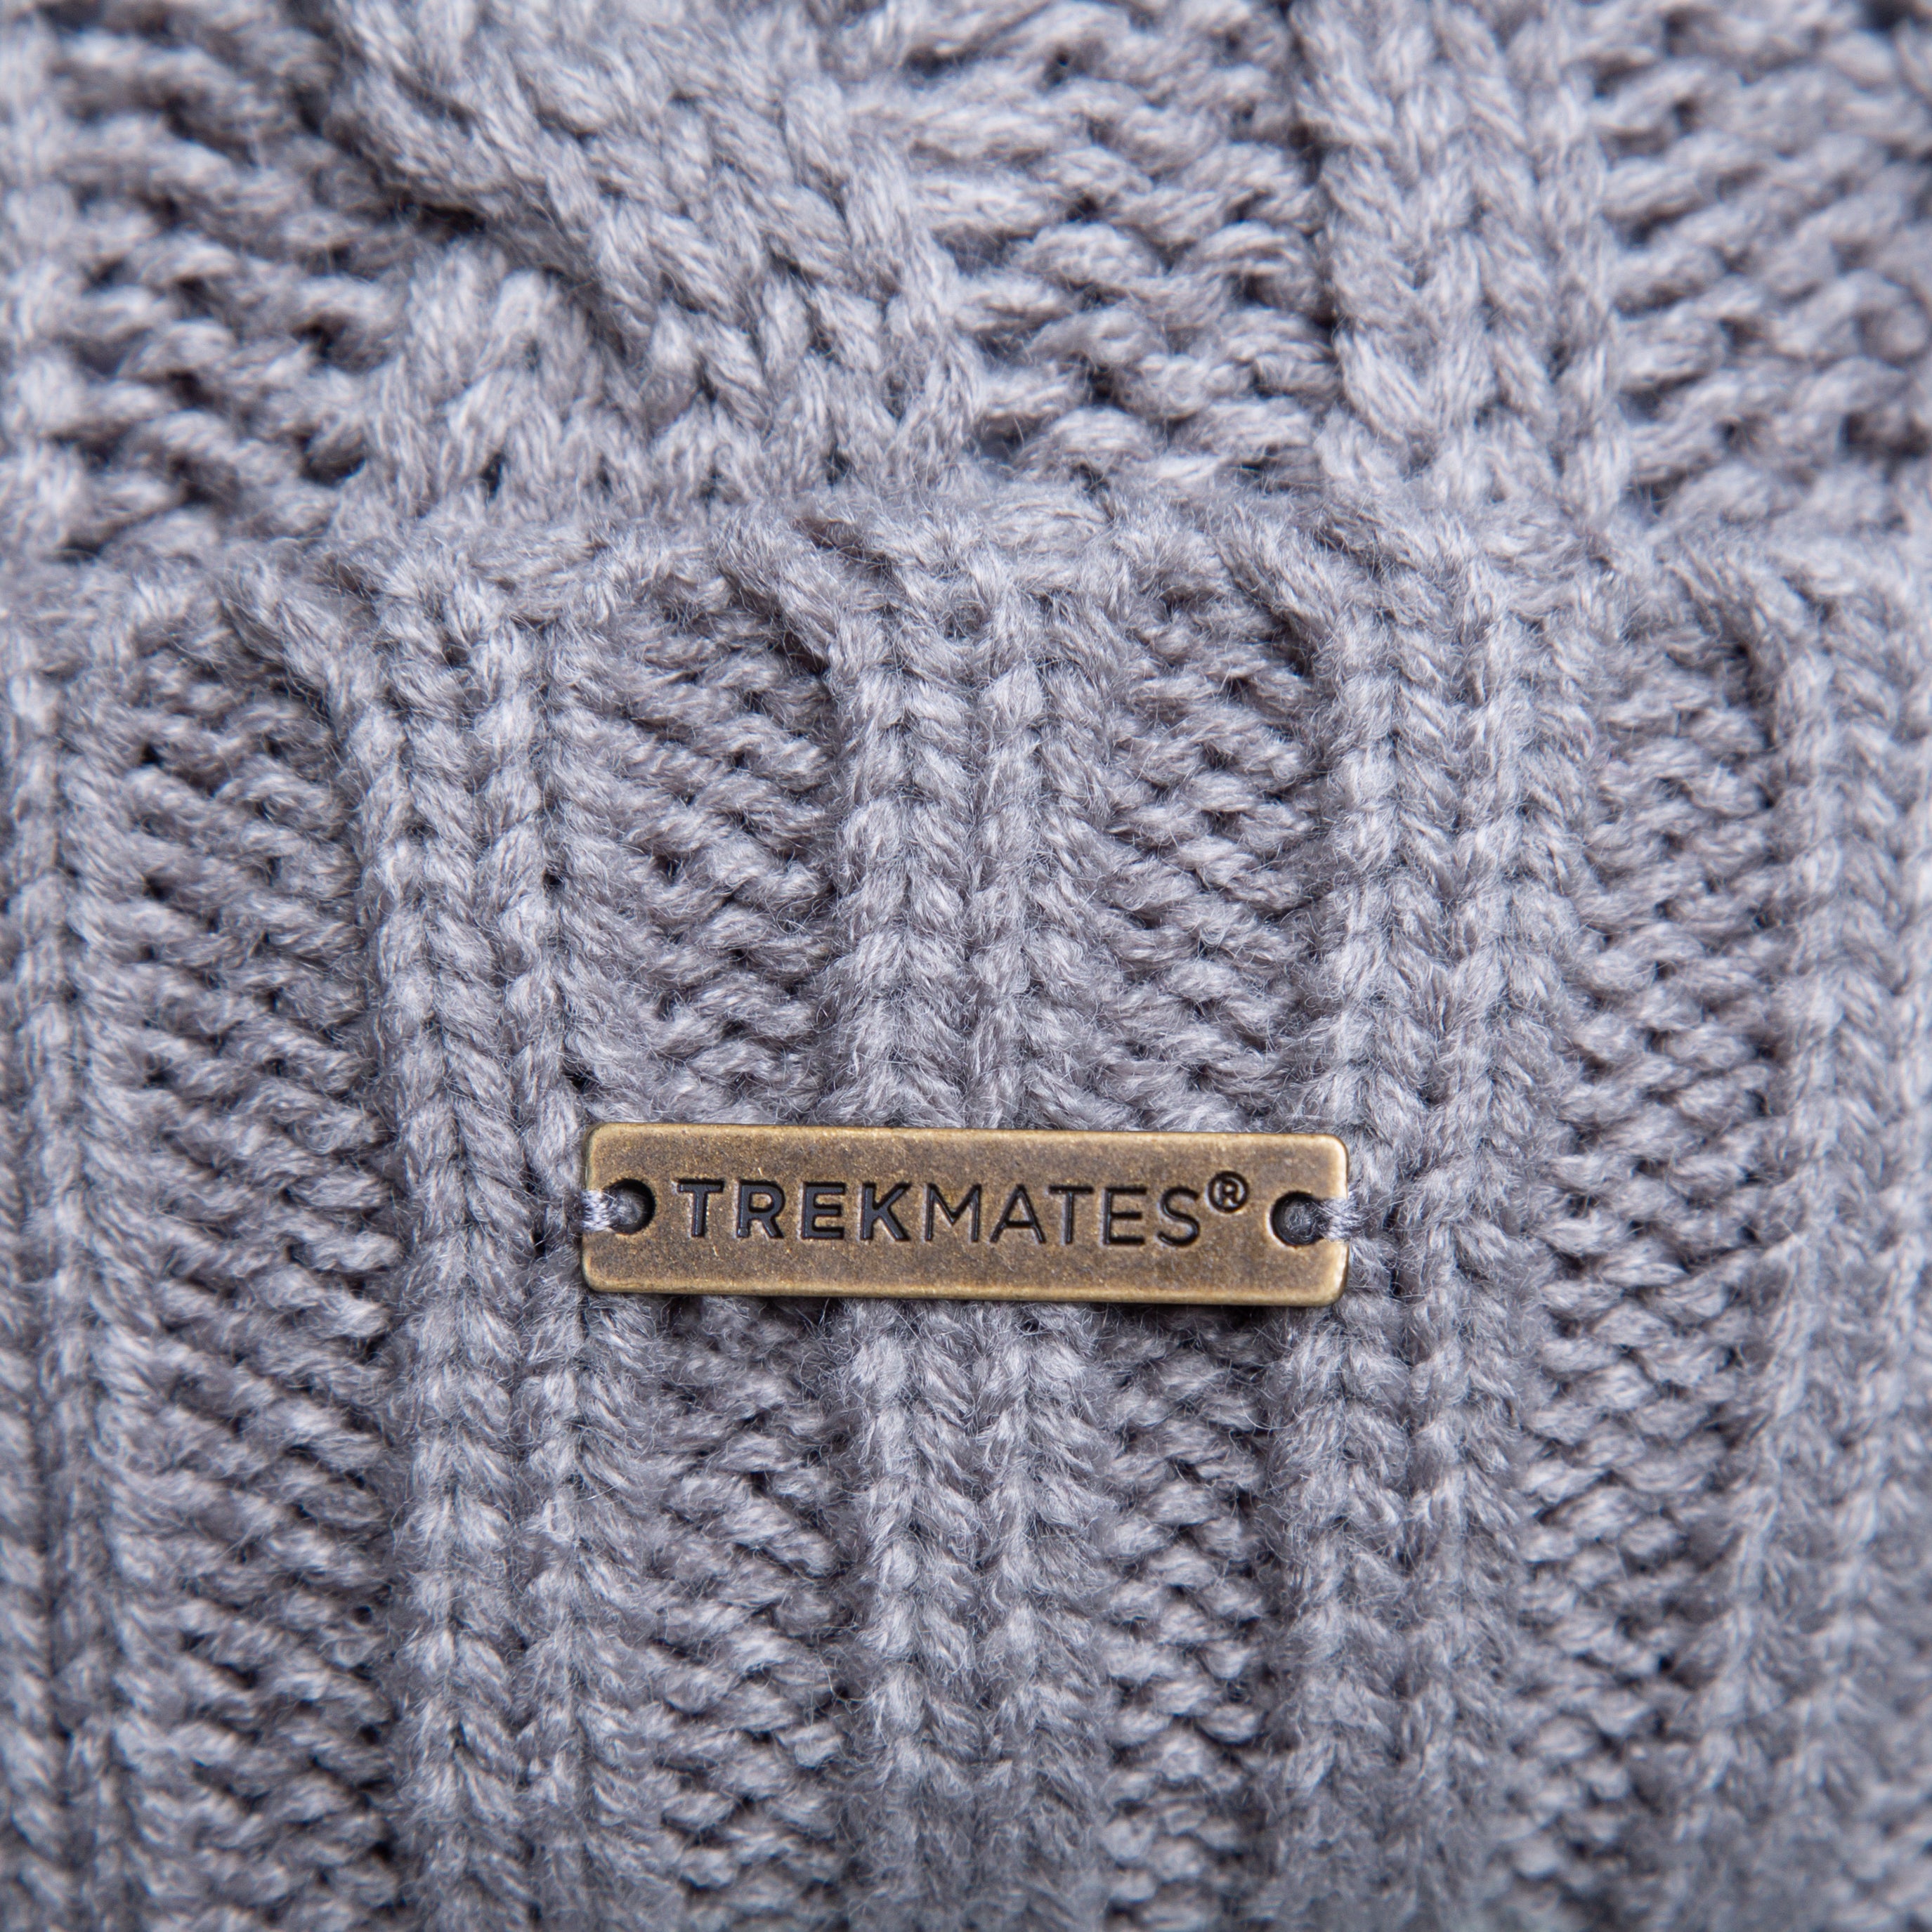 Stormy DRY knit hat